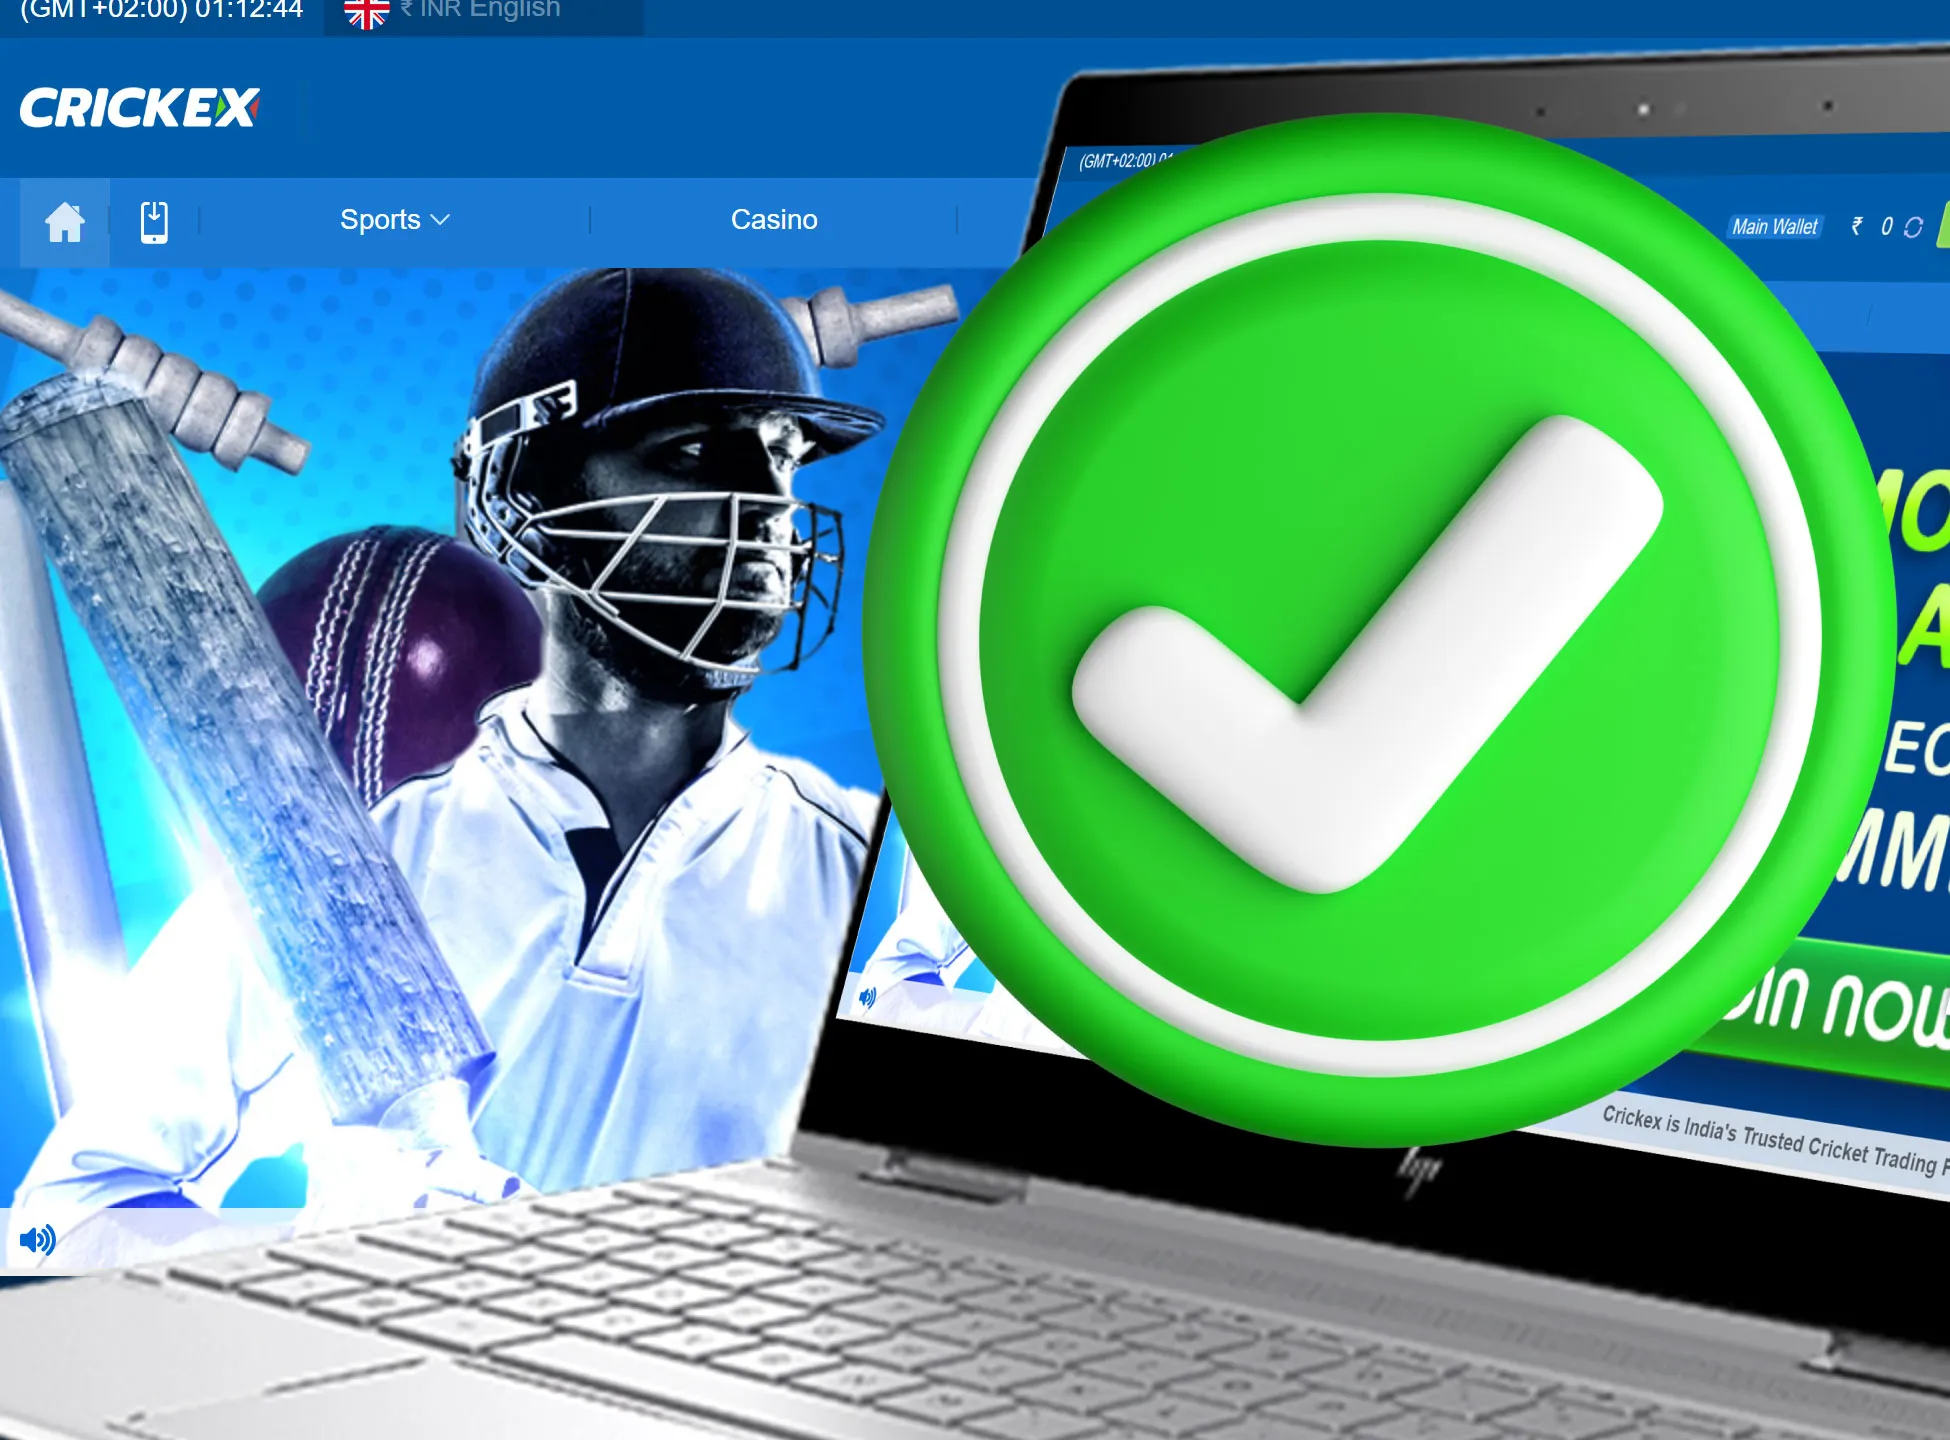 Sign up for Crickex, choose your favorite sport team and place bets on it's win.